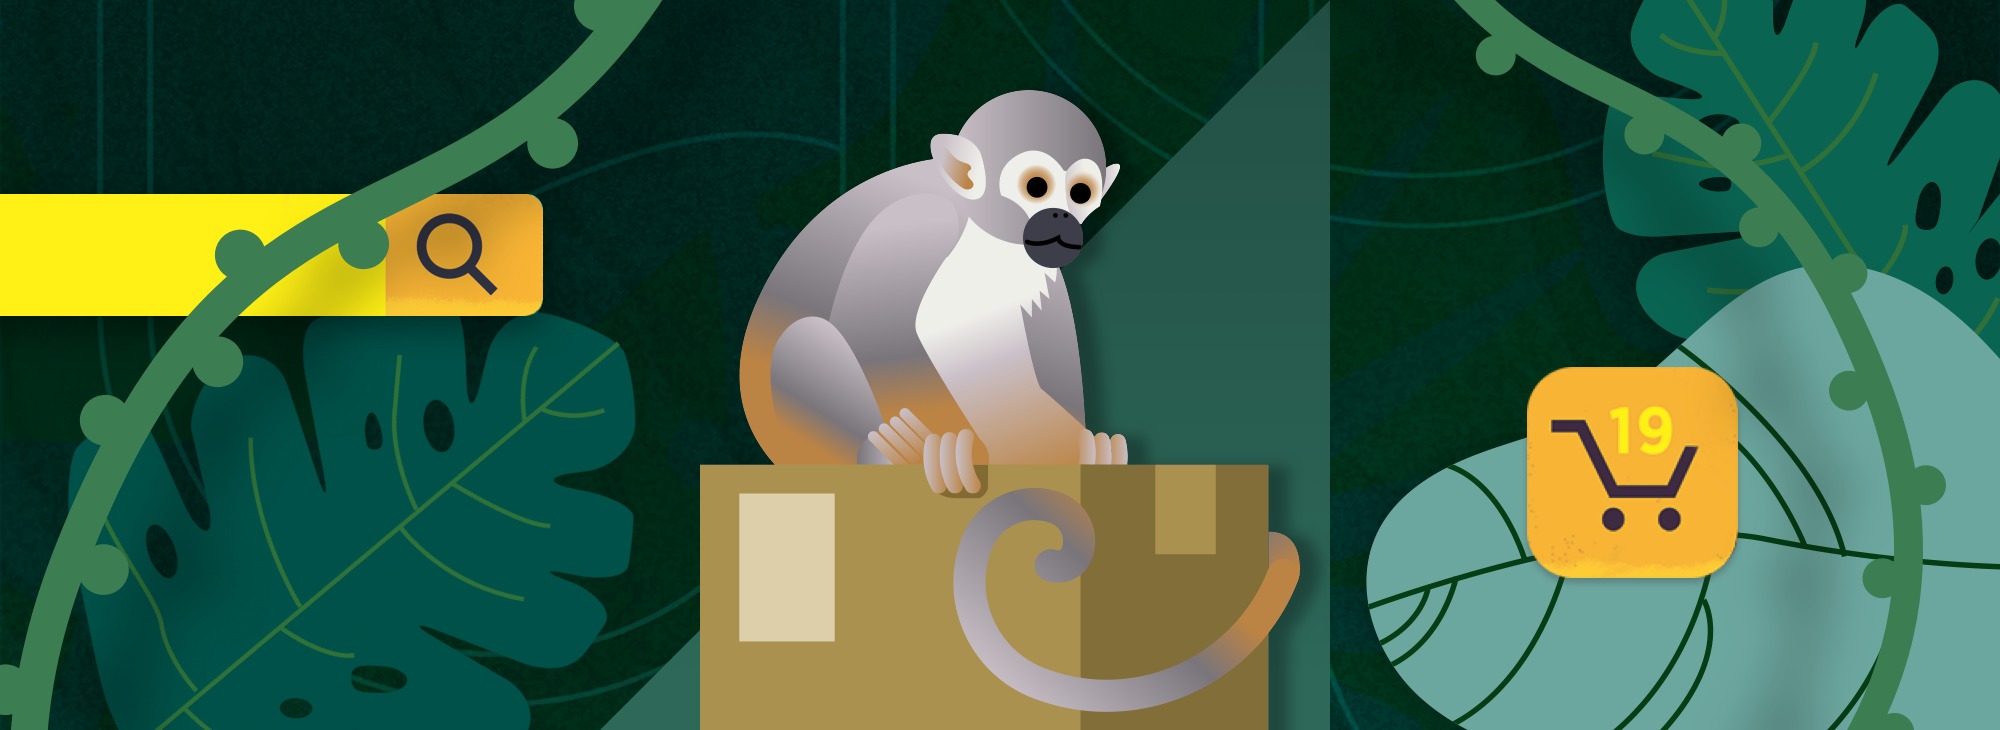 Brand Monkey - Obsessed with Sales Growth on 's Marketplace